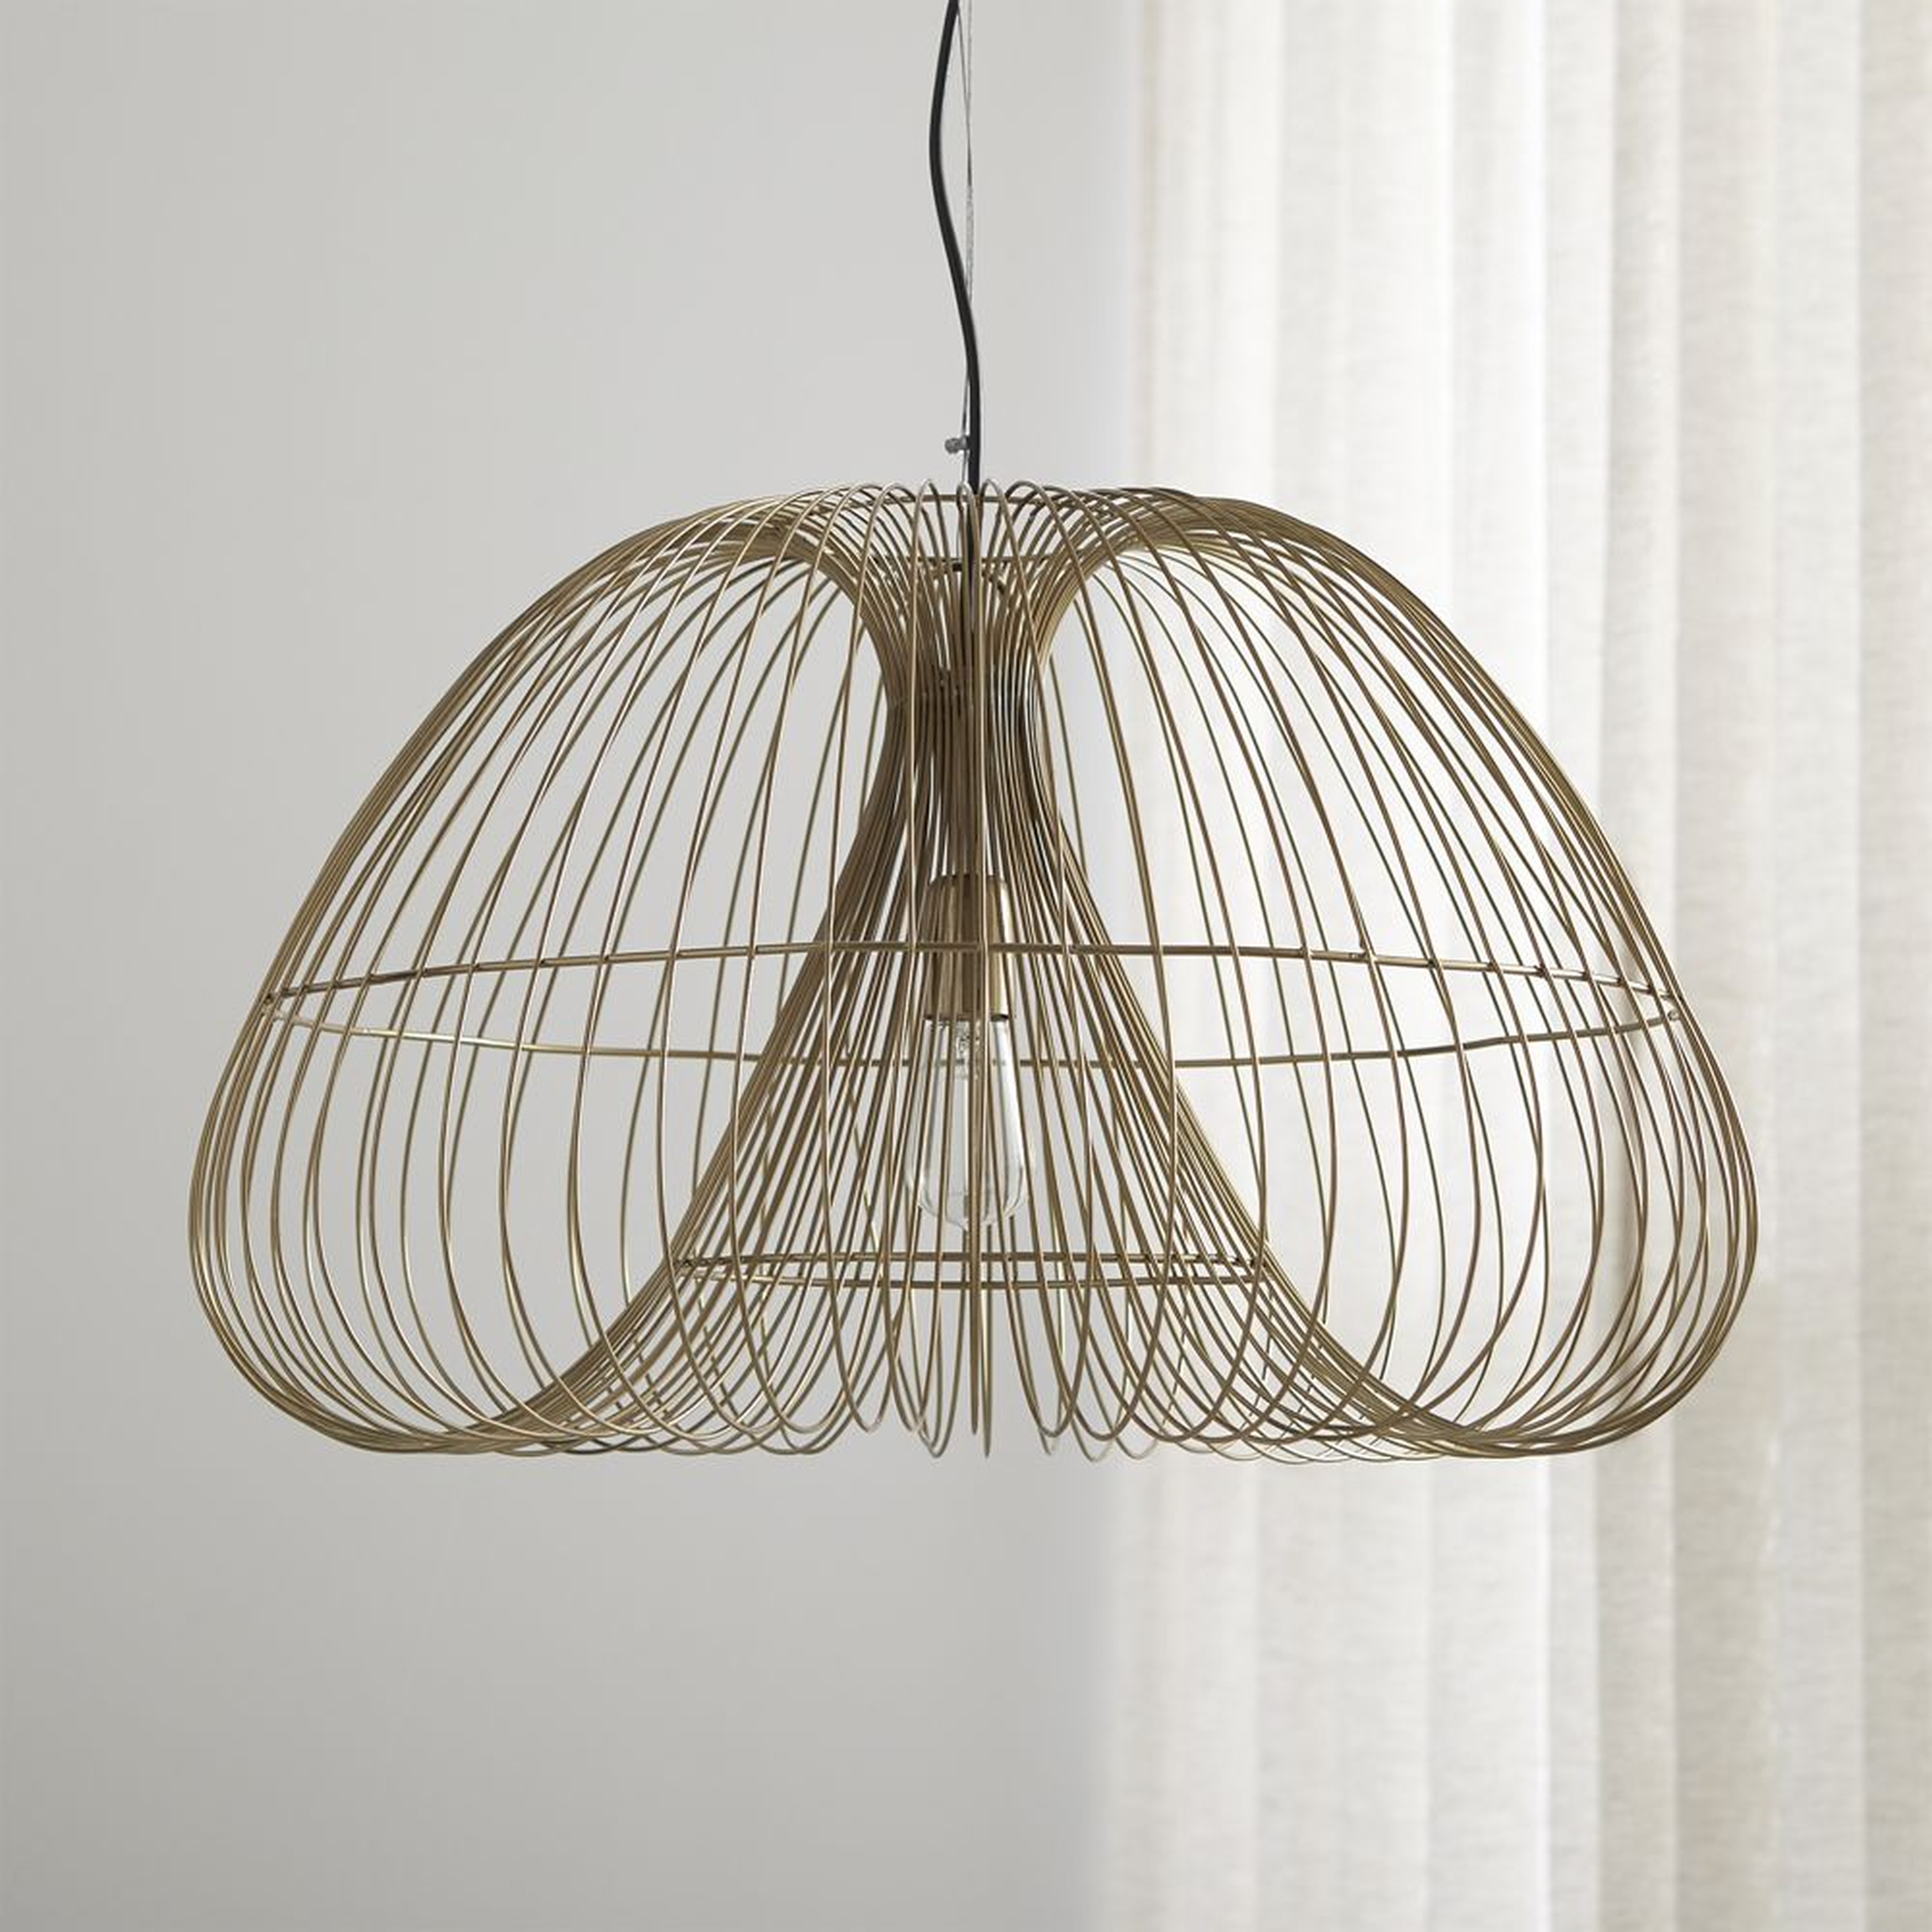 Cosmo Brass Wire Pendant Light - Crate and Barrel